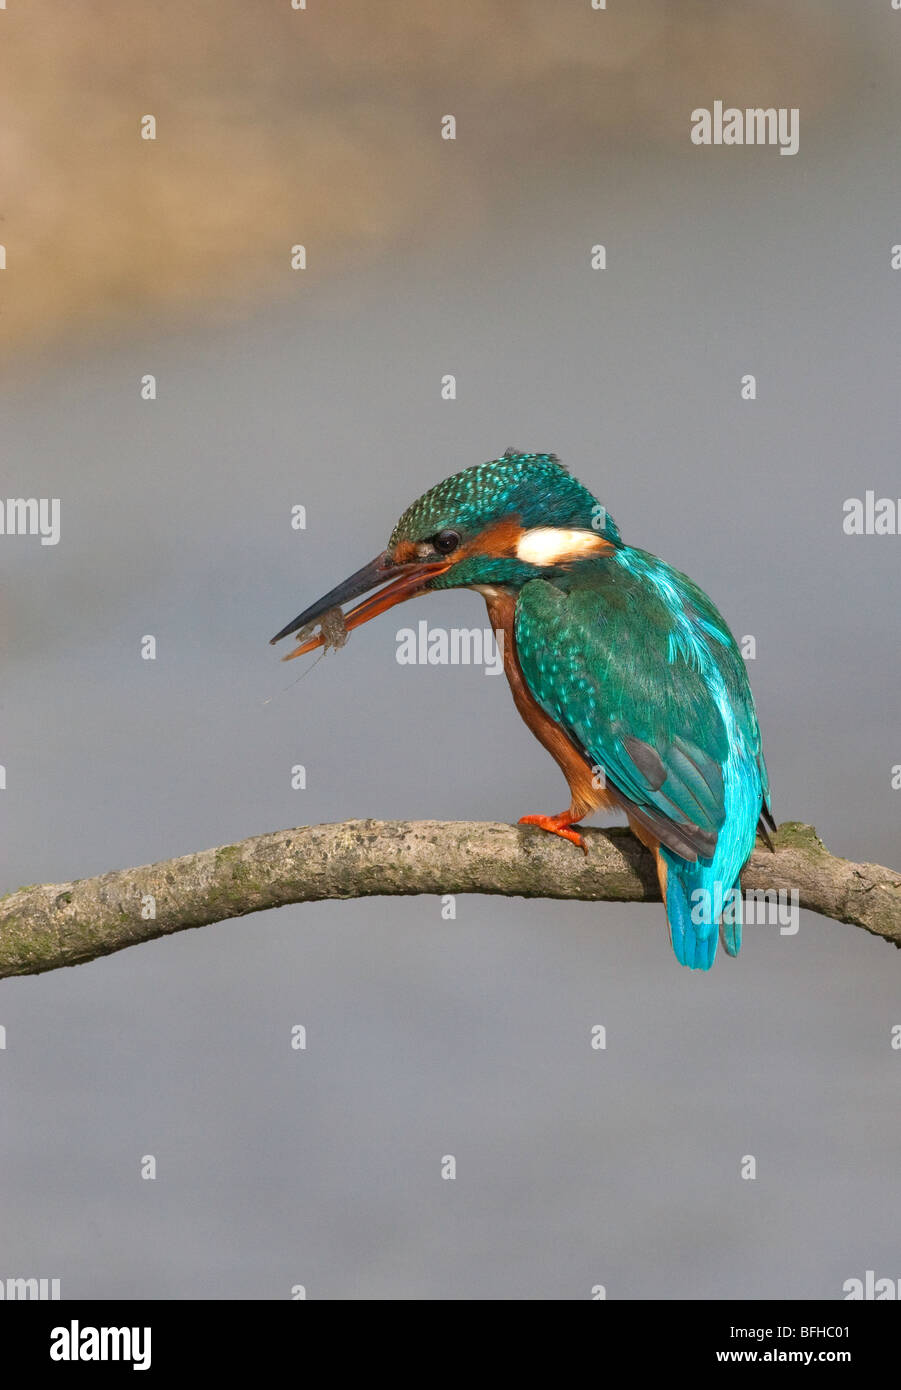 Alcedo atthis - Kingfisher with captured prey Stock Photo